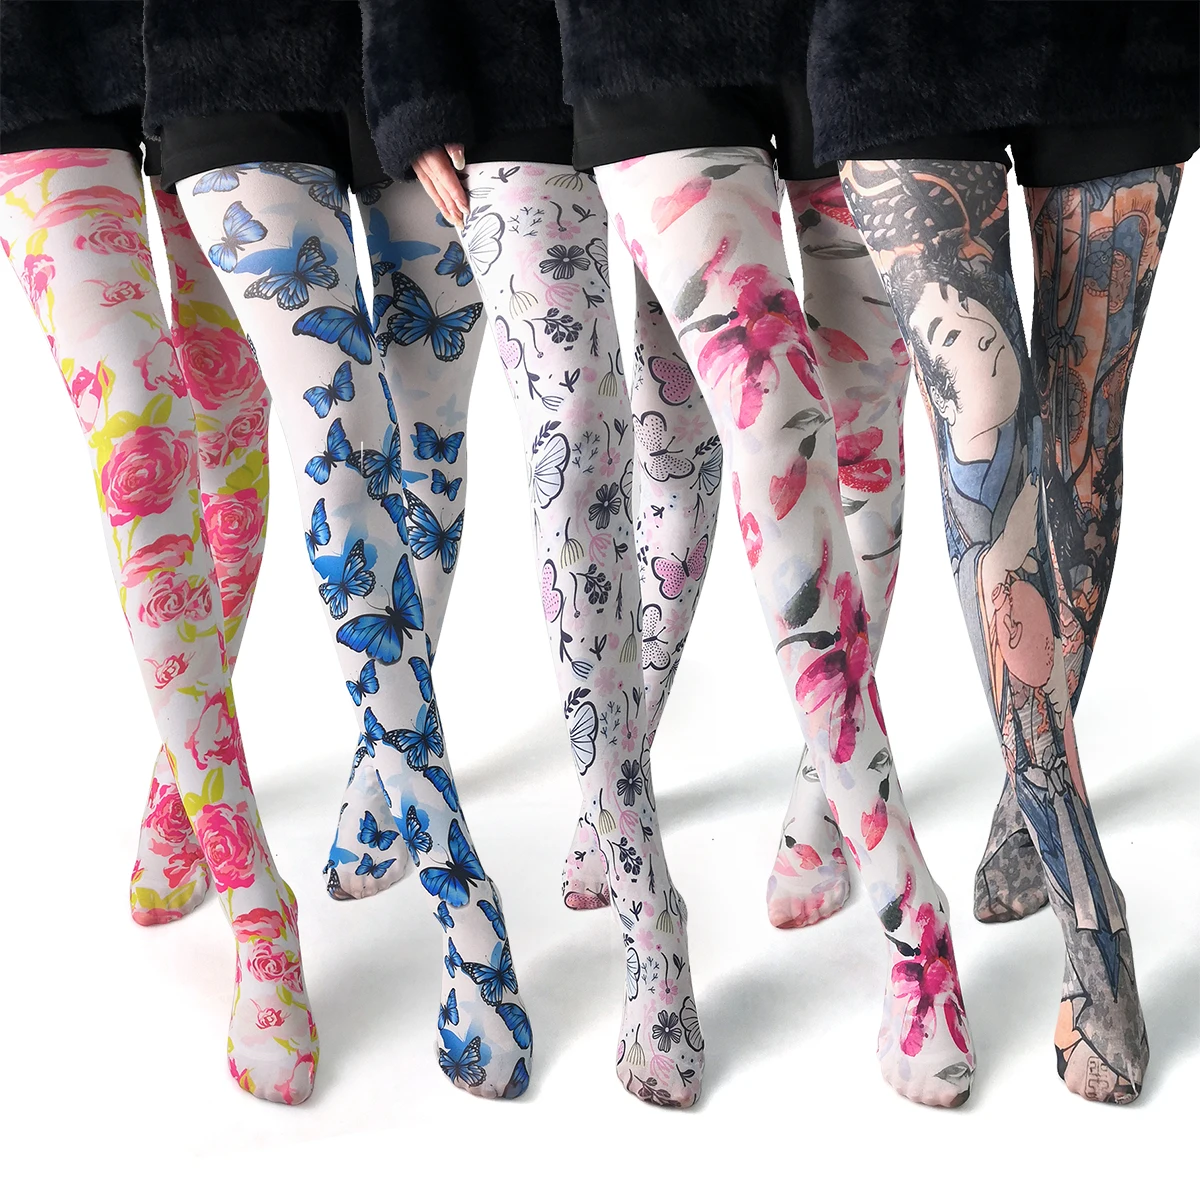 Floral Small Pink Flower Printed Asian Control Top Girl Tube Designer Pantyhose Dot Flower Tights